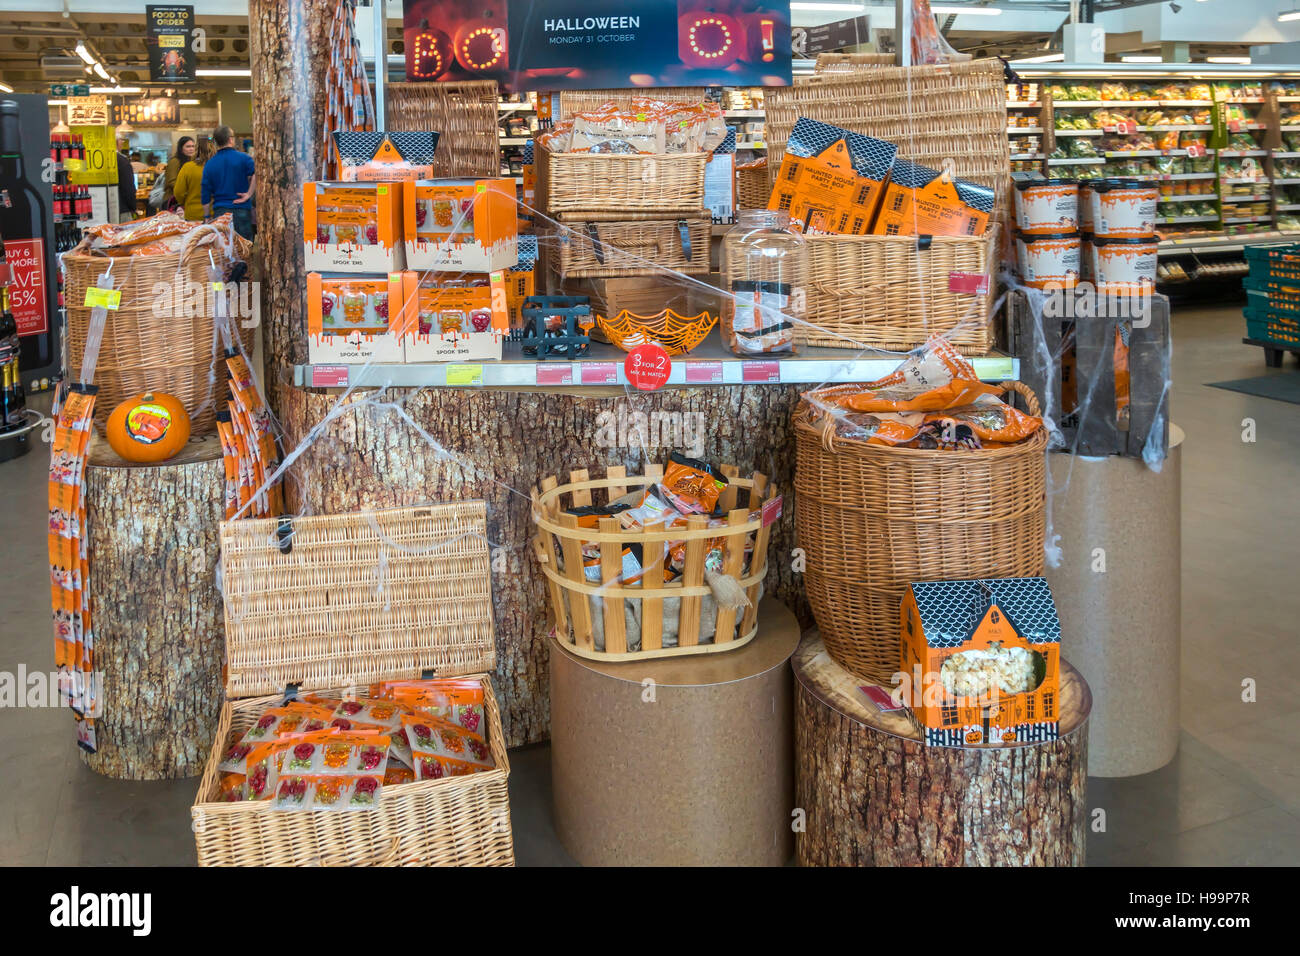 A display of goods for Halloween in a Marks and Spencer Only Food Shop Stock Photo